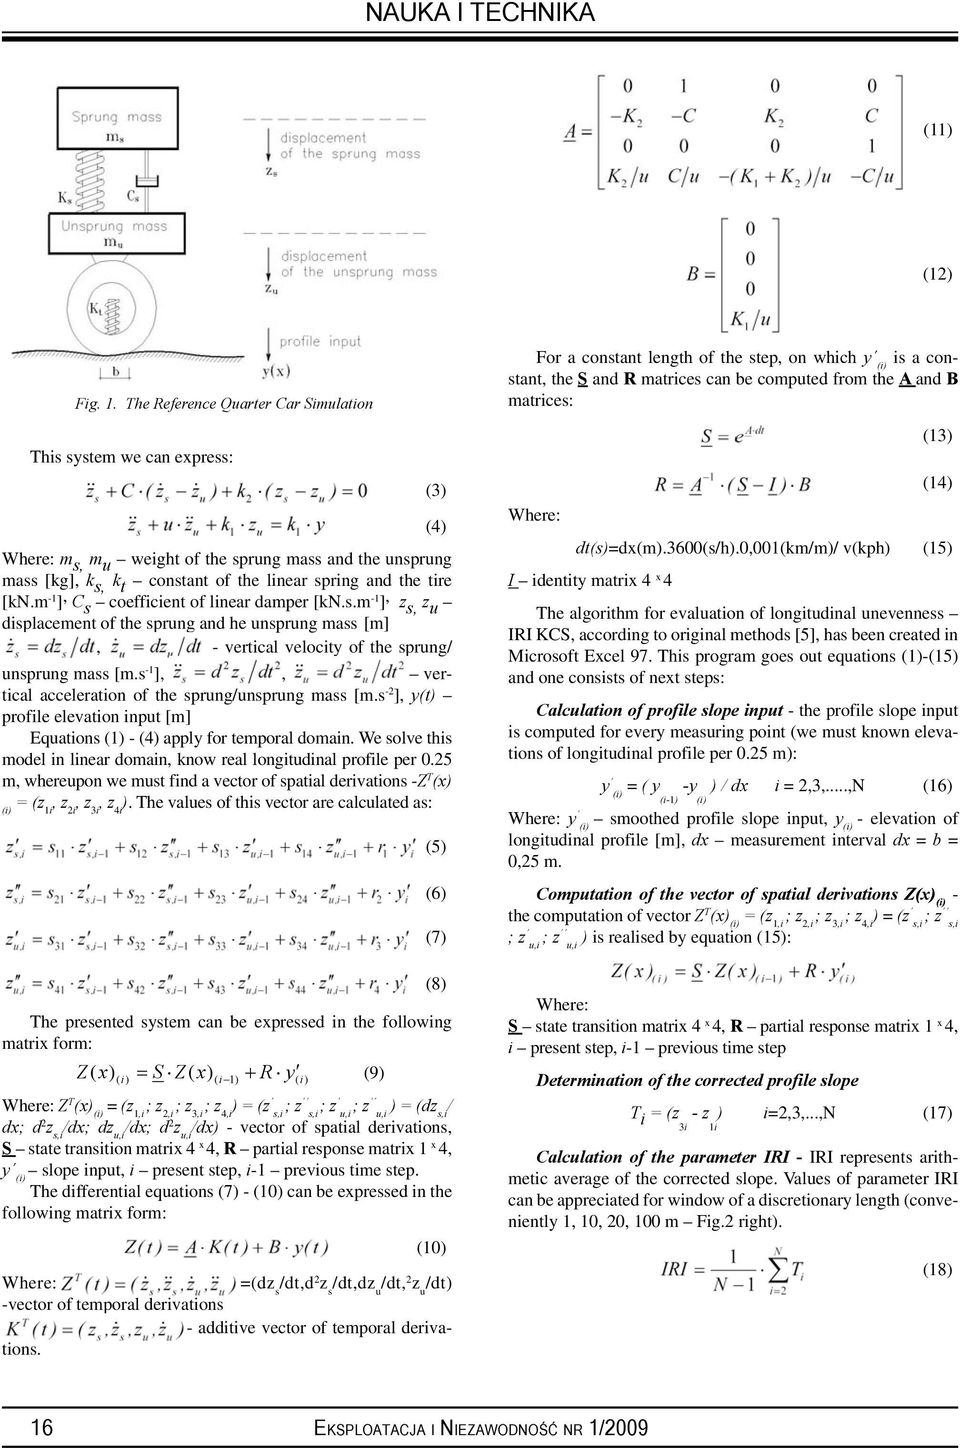 m -1 ], C s coefficient of linear damper [kn.s.m -1 ], z s, z u displacement of the sprung and he unsprung mass [m], - vertical velocity of the sprung/ unsprung mass [m.